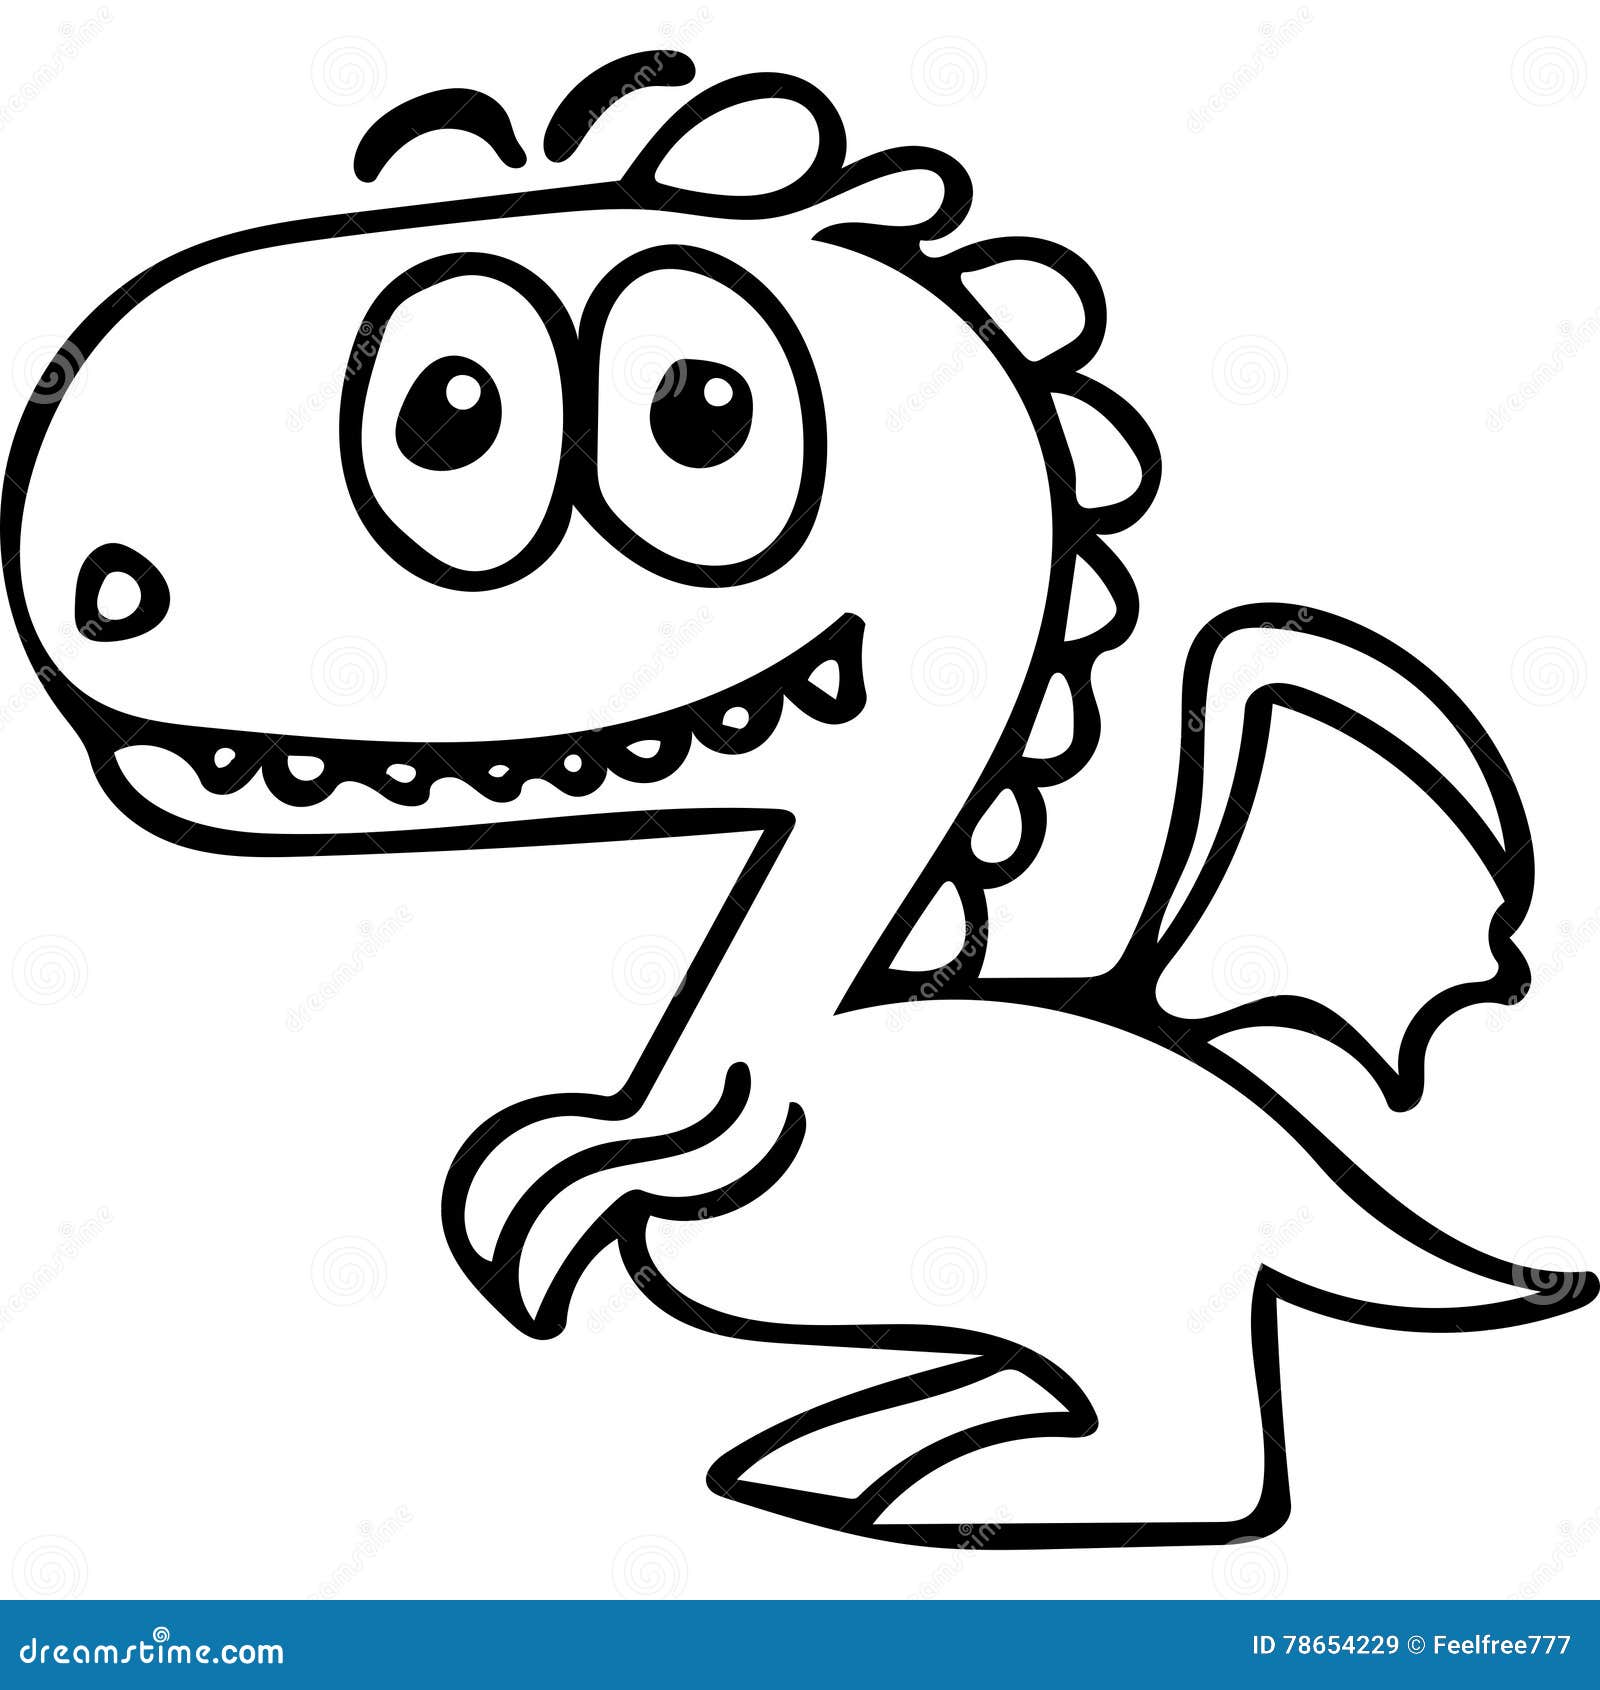 Dragon kids coloring page stock illustration. Illustration of learn -  78654229